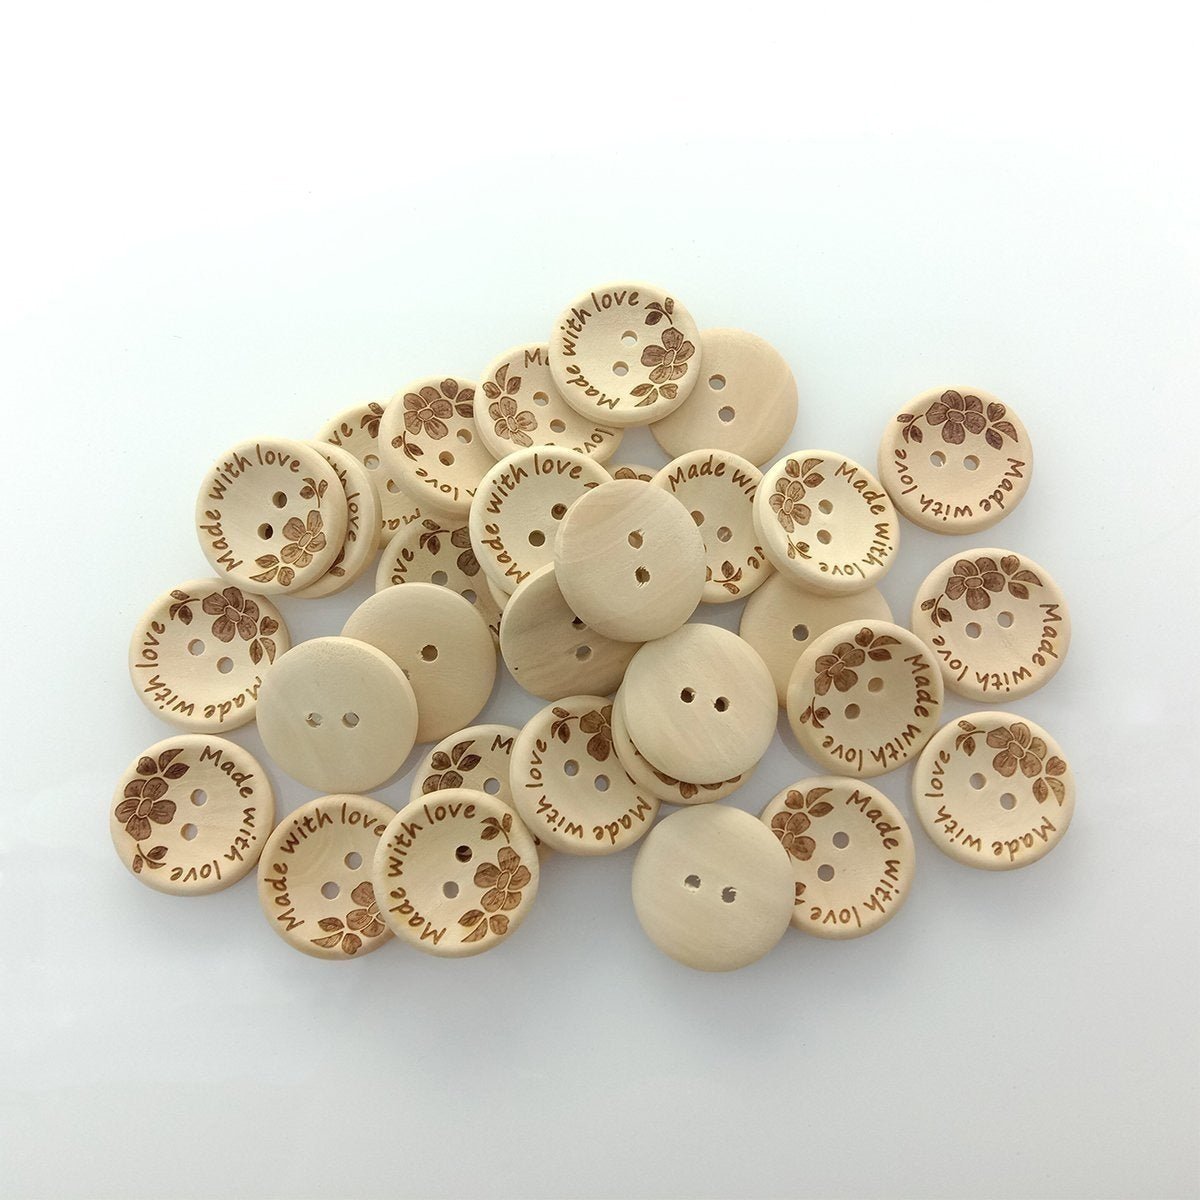 20/30pcs 25mm/30mm Made With Love Handmade Clothes Flower Wooden Sewing Buttons - 25mm 30pcs - - Asia Sell